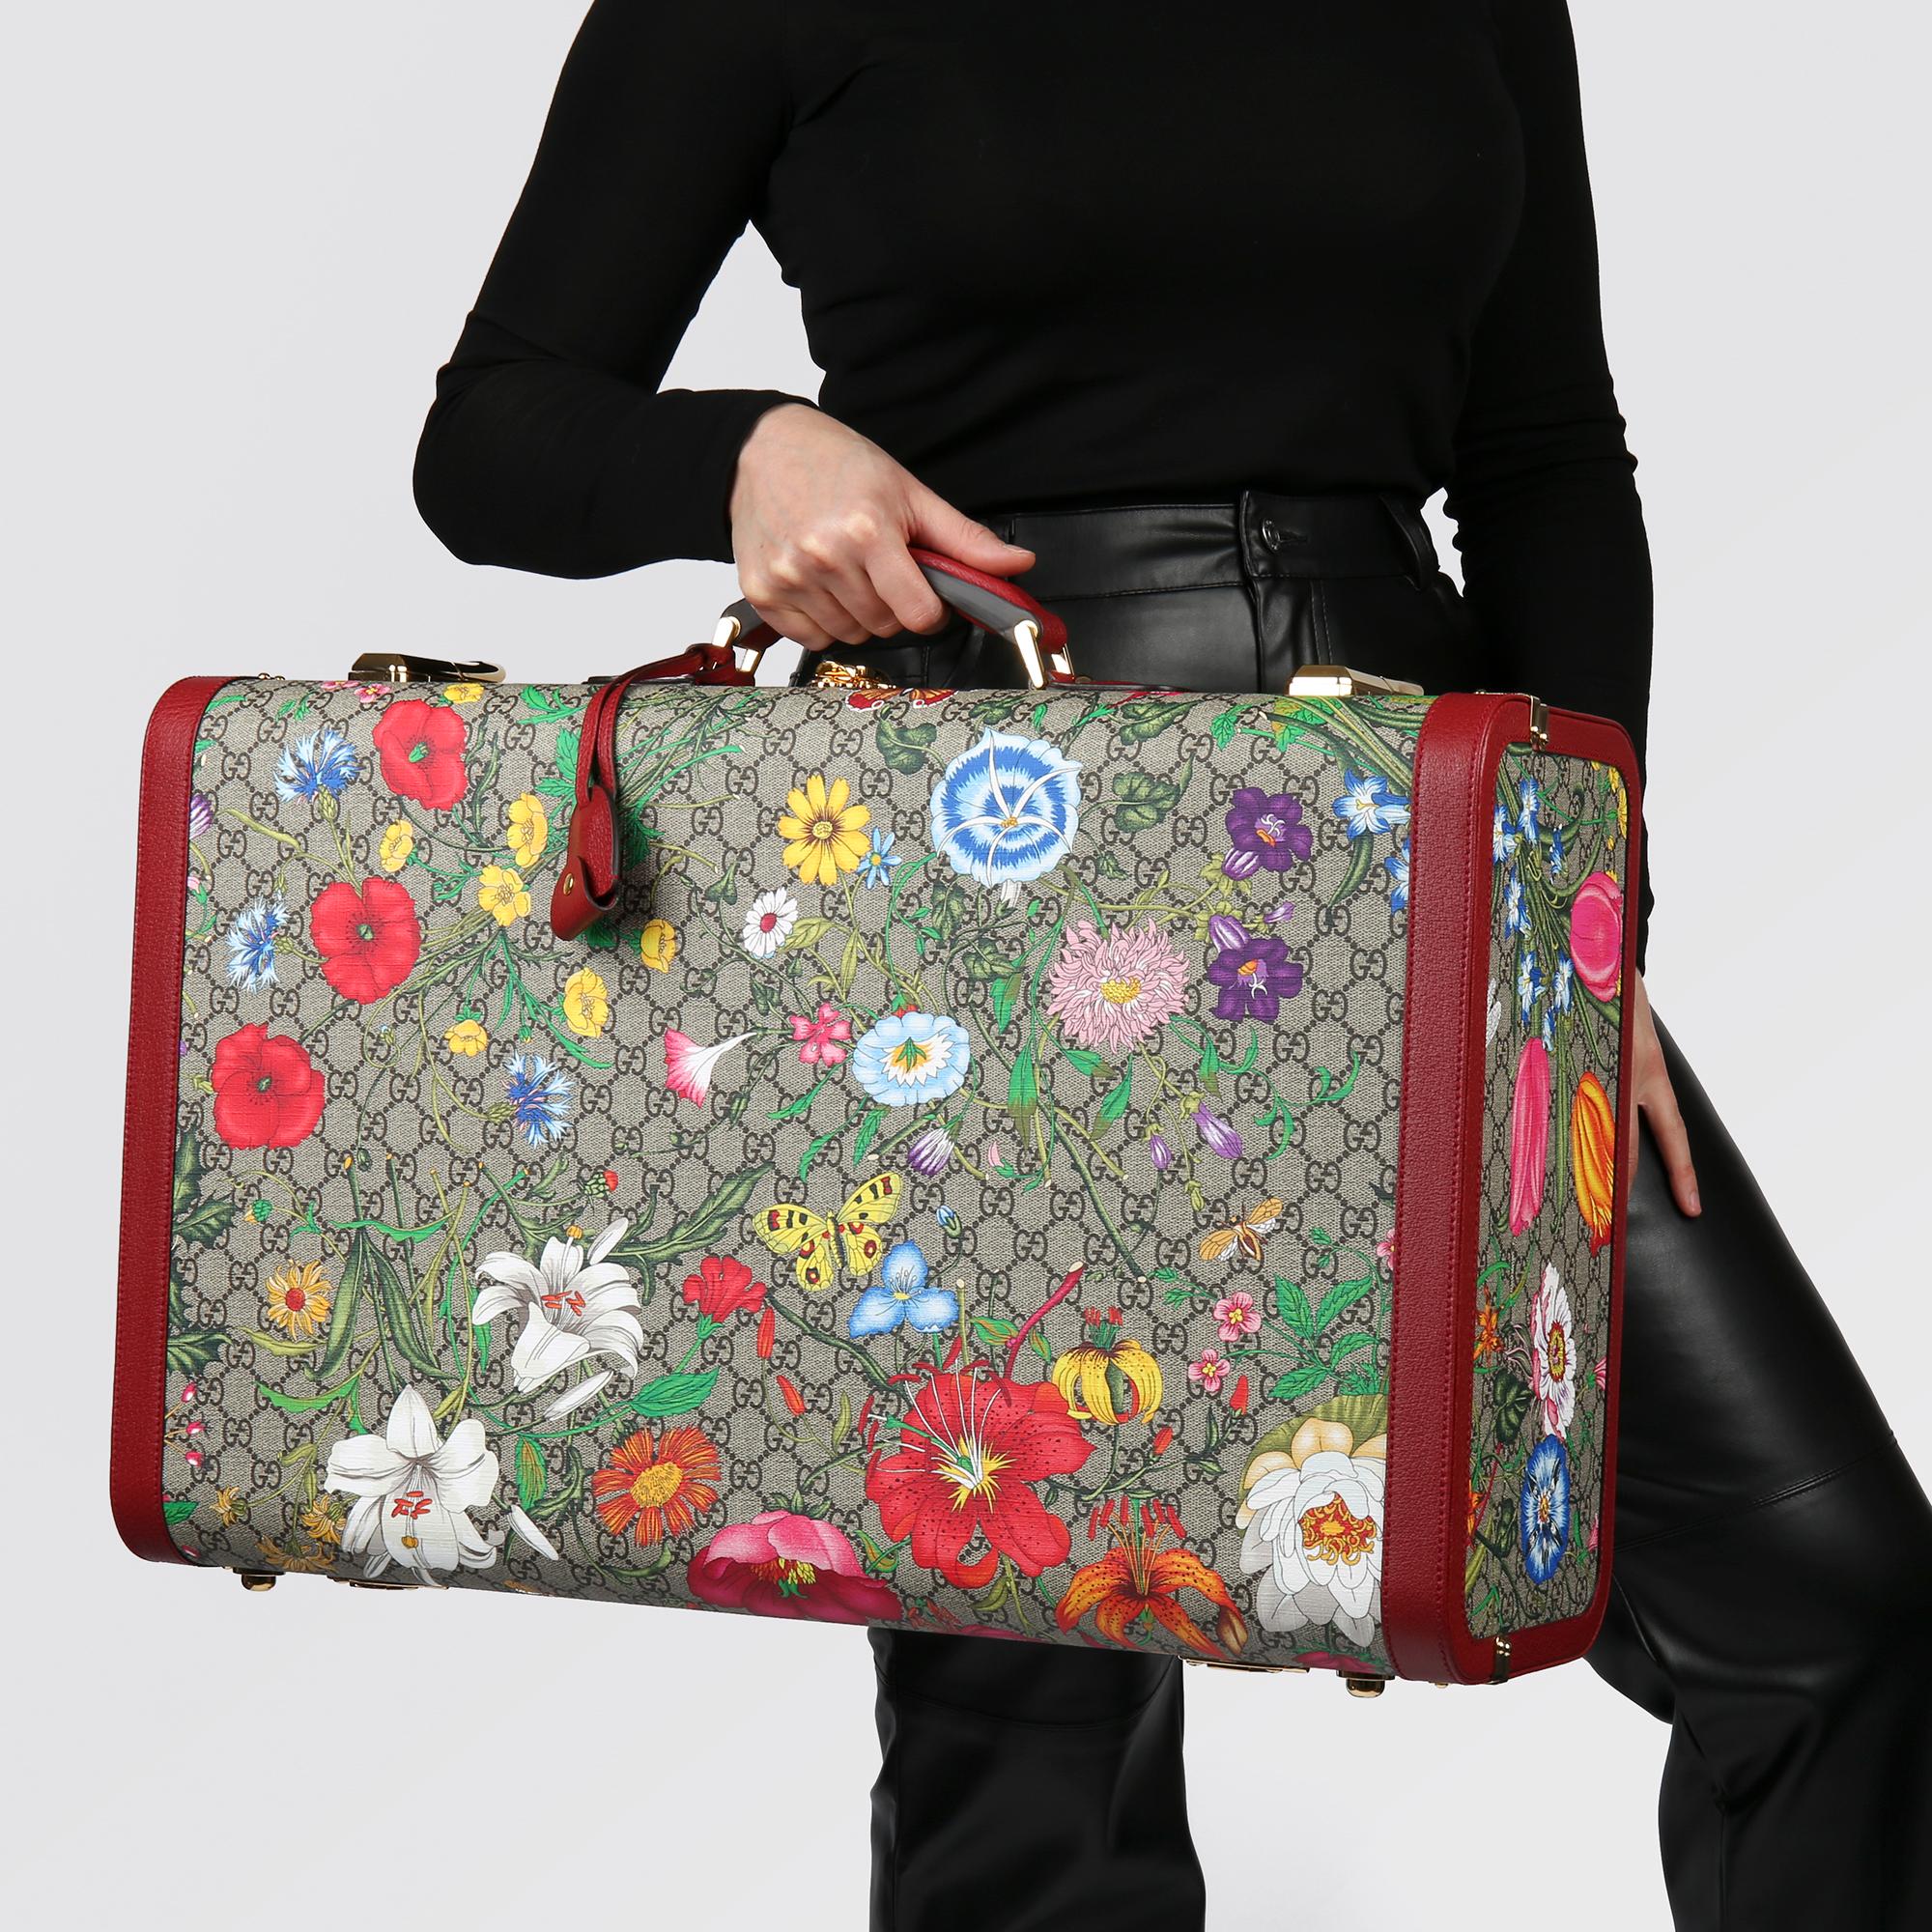 GUCCI
GG Flora Coated Canvas & Red Pigskin Leather Large Suitcase Trunk 

Xupes Reference: HB3769
Serial Number: 602675 618120 
Age (Circa): 2021
Accompanied By: Clochette, Keys, Care Booklet
Authenticity Details: Date Stamp (Made in Italy) 
Gender: